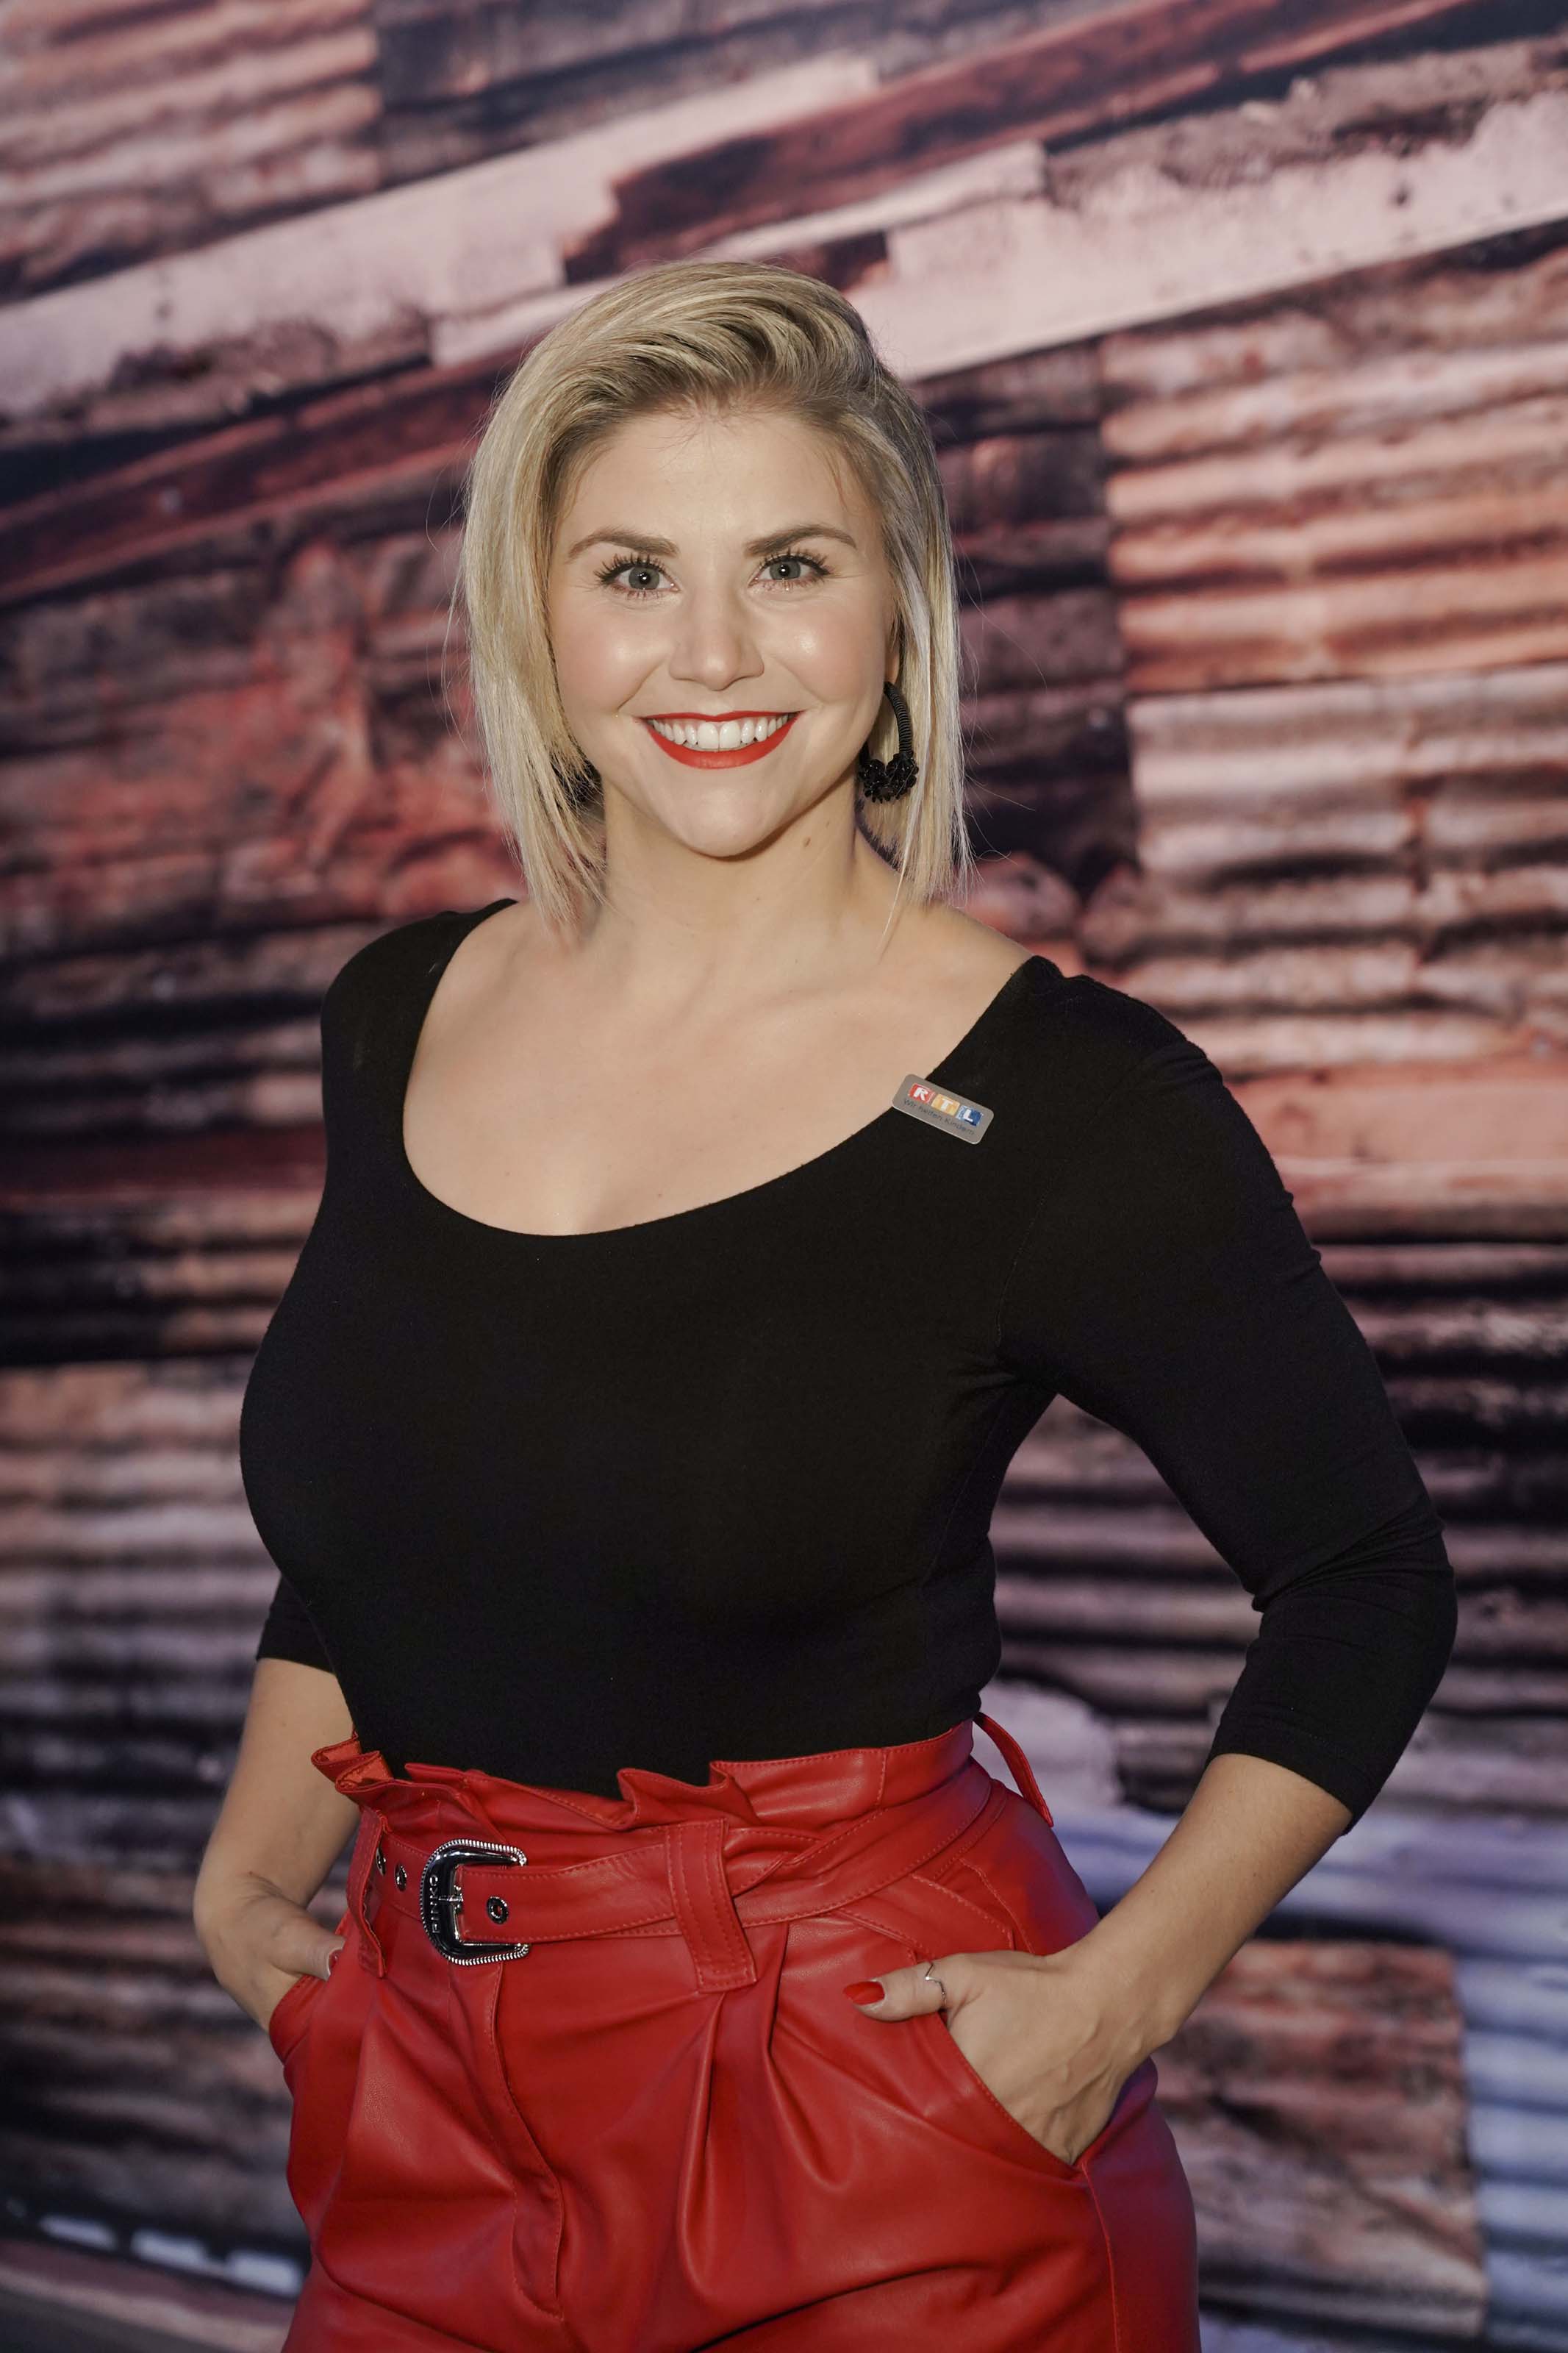 Beatrice Egli On The Set Of A Photoshoot 2019 Hawtcelebs | Images and ...